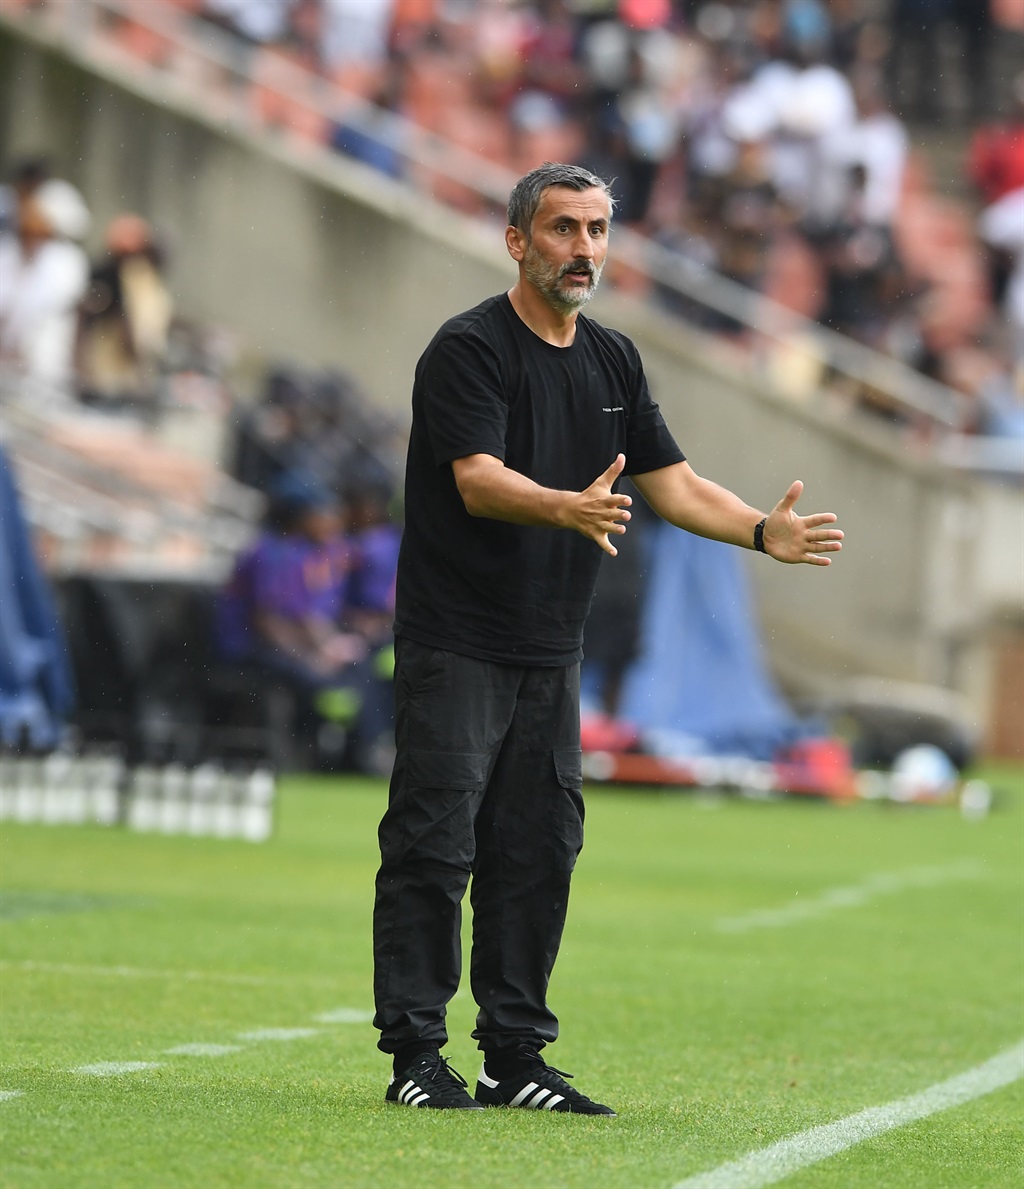 POLOKWANE, SOUTH AFRICA - JANUARY 06: Jose Reveiro coach of Carling All-Star XI during the Carling Knockout match between Stellenbosch FC and Carling Knockout All-Star XI at Peter Mokaba Stadium on January 06, 2024 in Polokwane, South Africa. (Photo by Philip Maeta/Gallo Images)